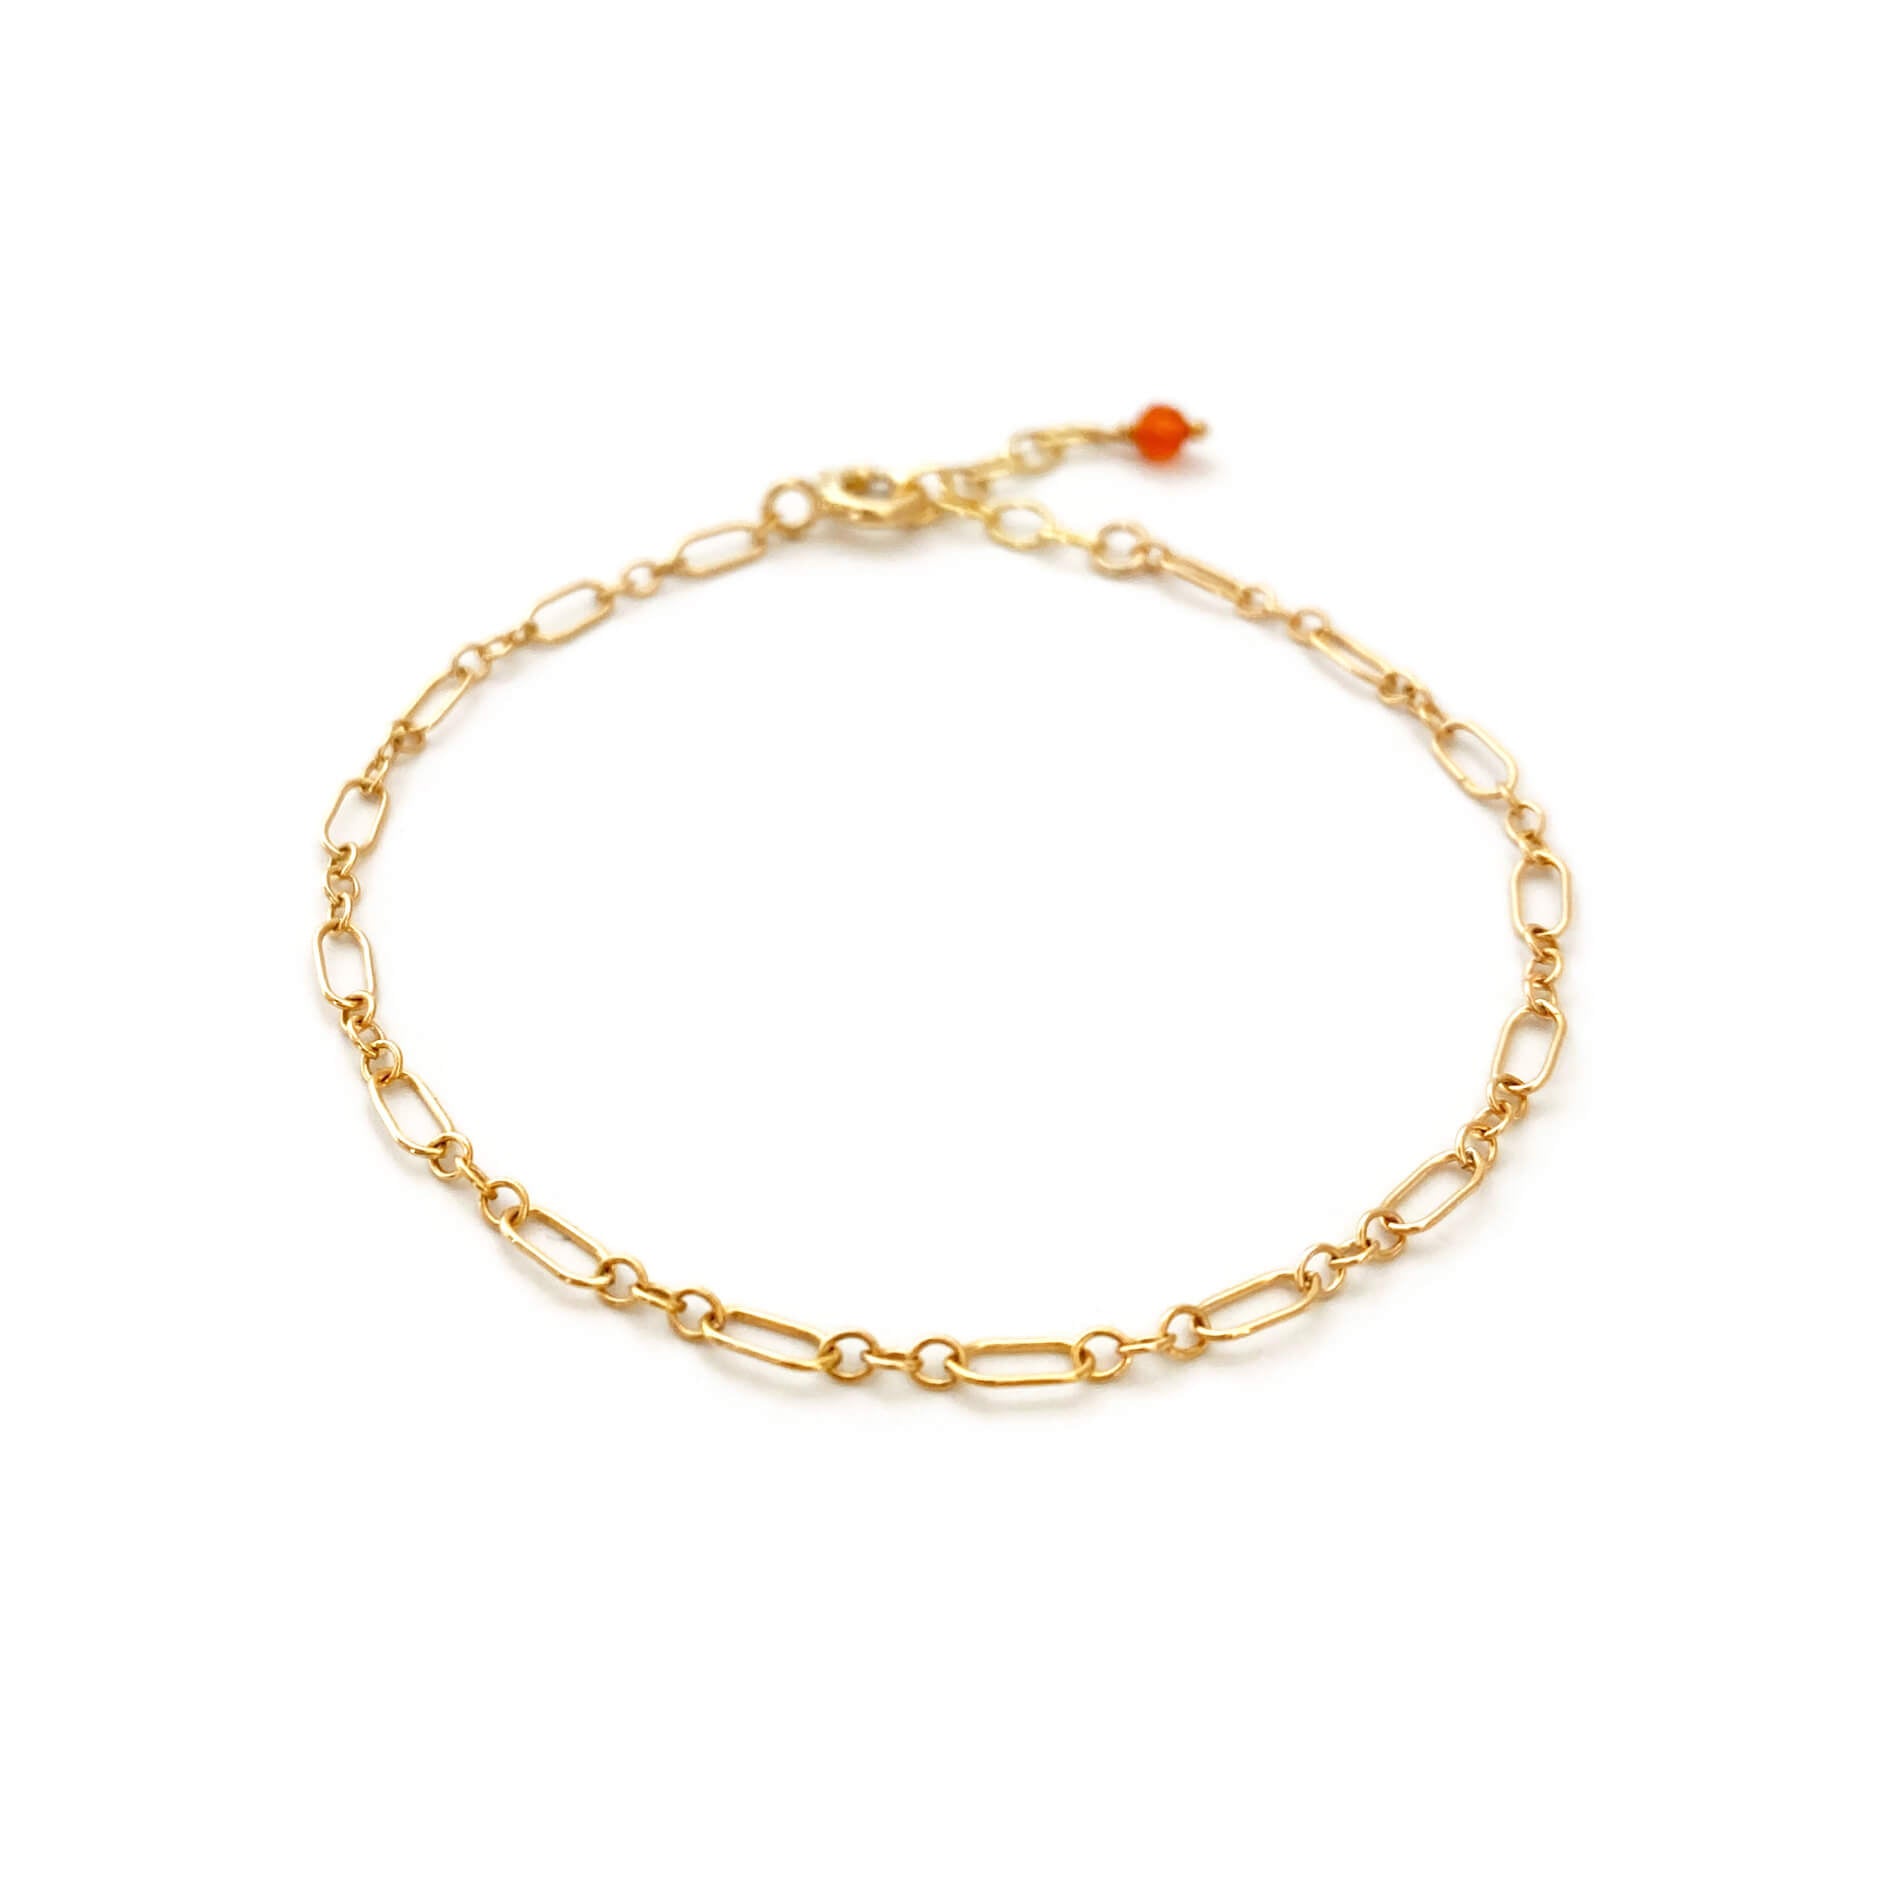 This is a dainty gold figaro chain with carnelian bead.  It's made of gold filled figaro chain with genuine carnelian bead. 